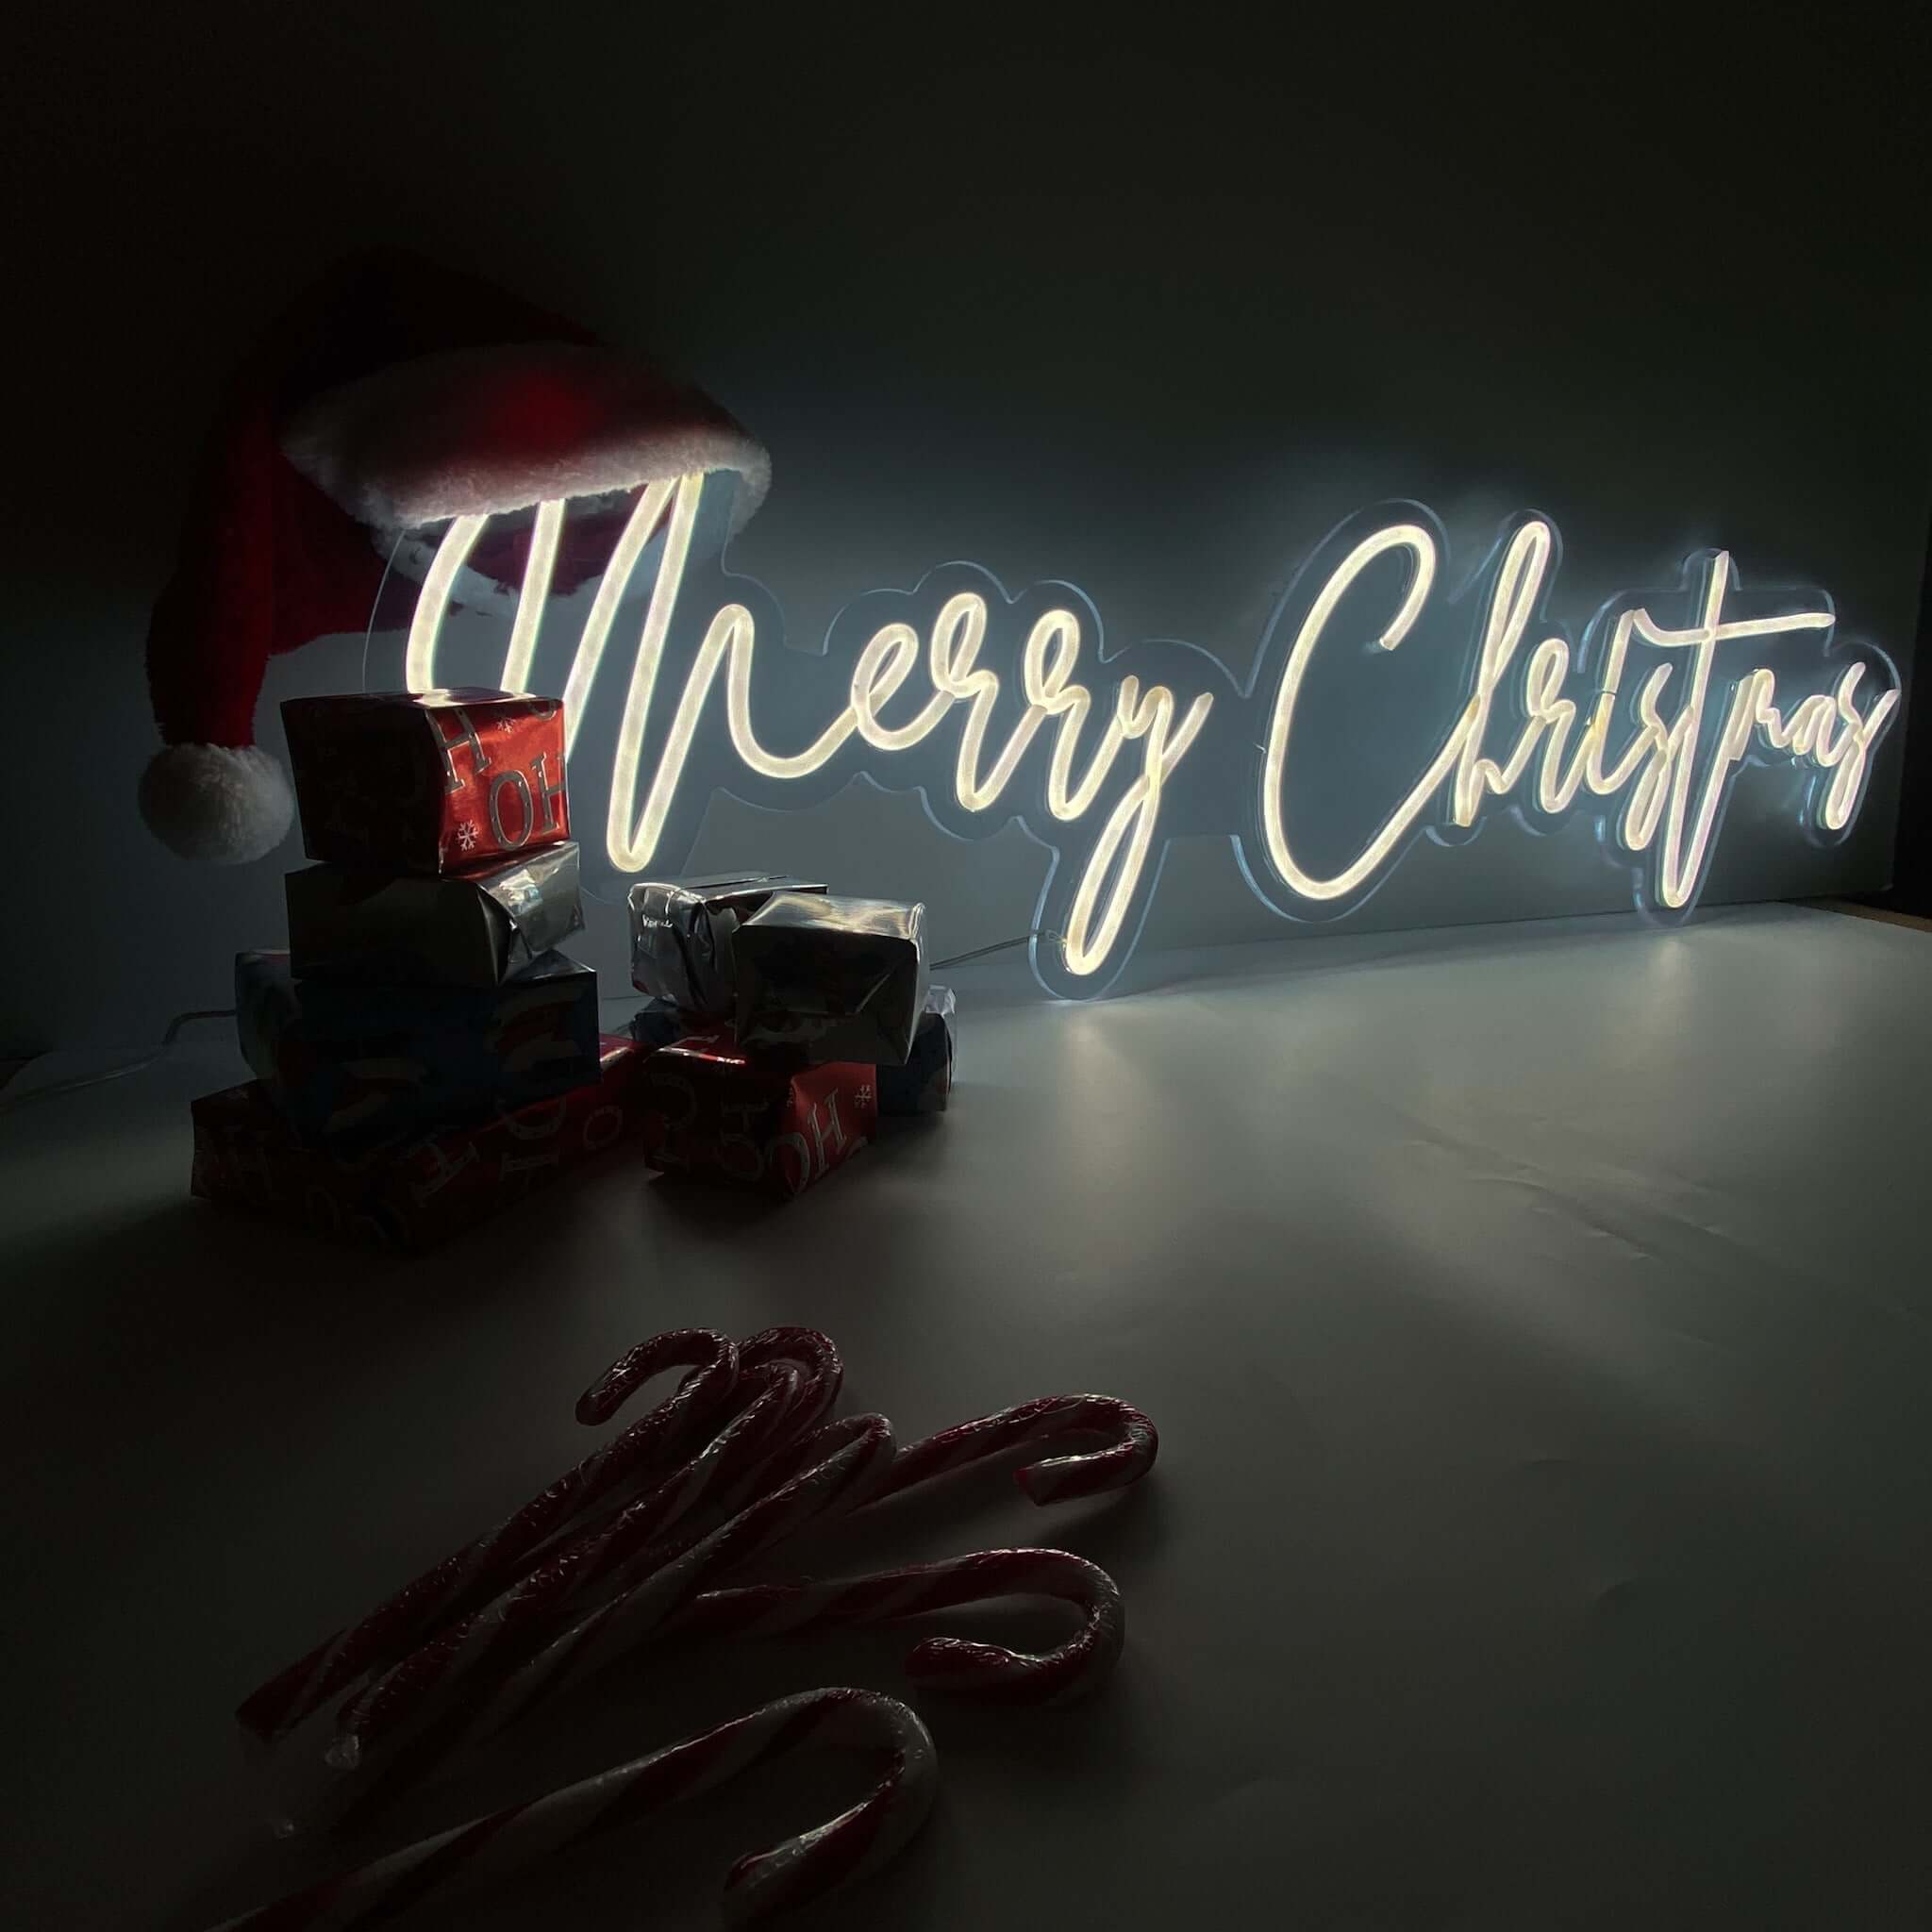 The Best Christmas LED Neon Signs, You Must Have For The Holiday - Planet Neon